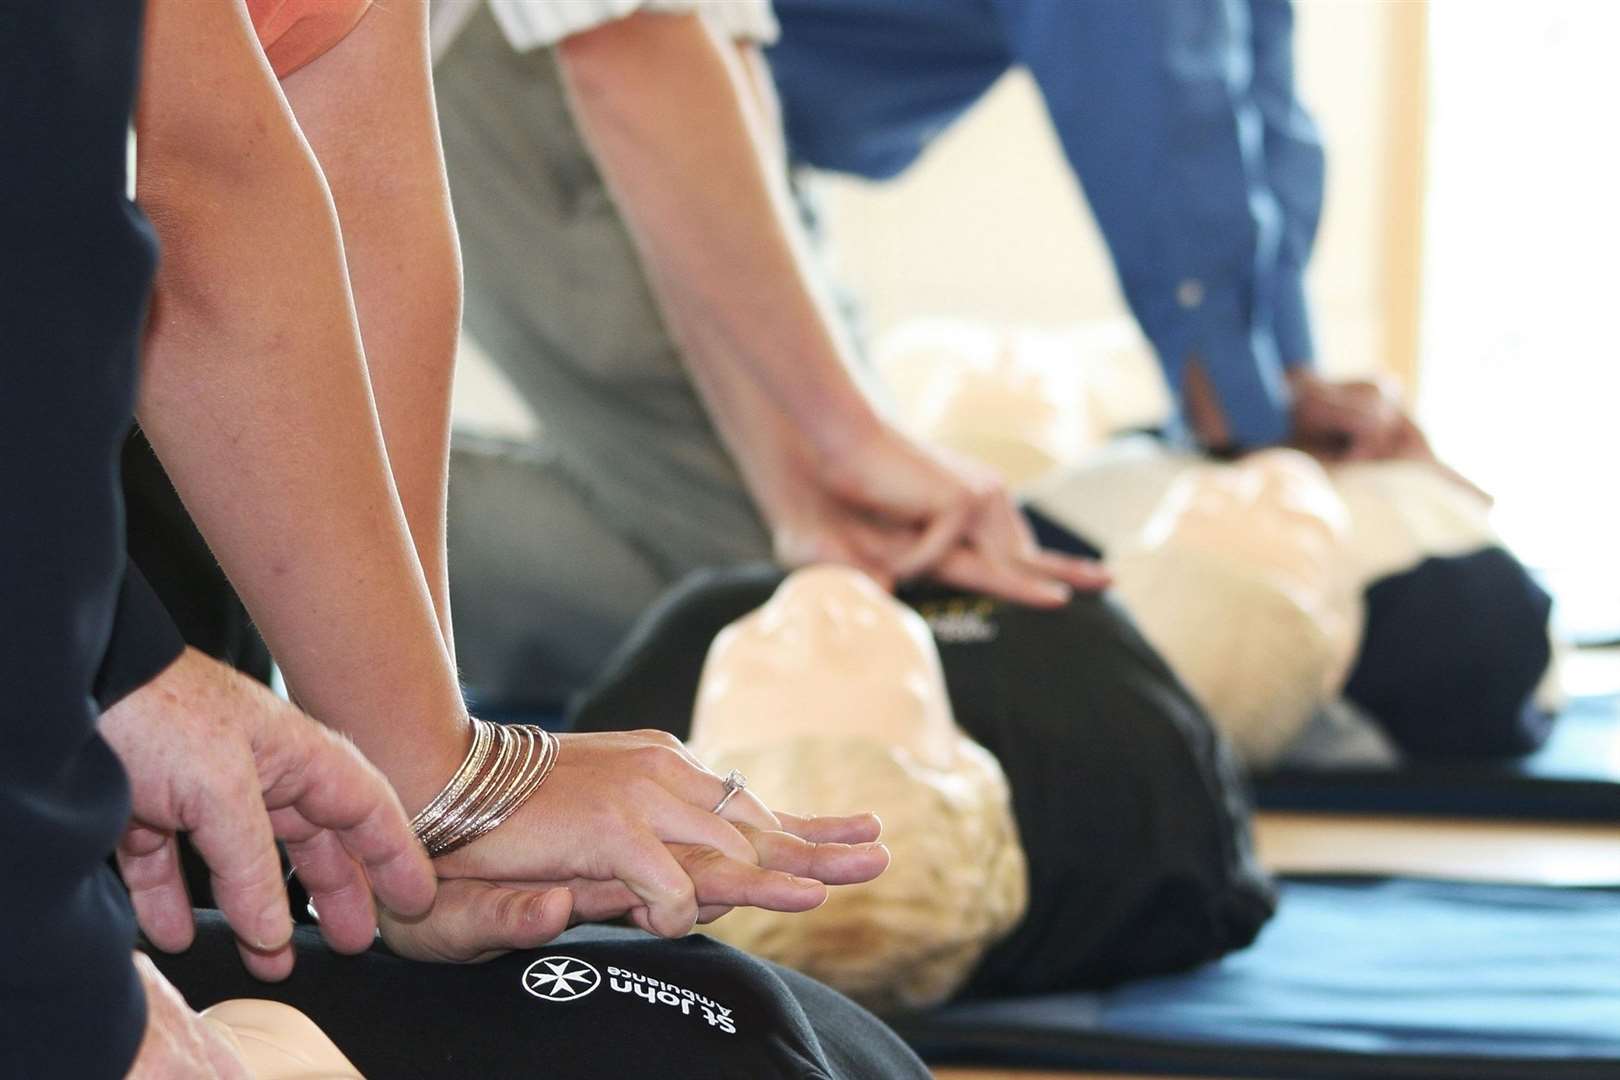 Medical professionals behind Restart a Heart Day say CPR training rates remain low